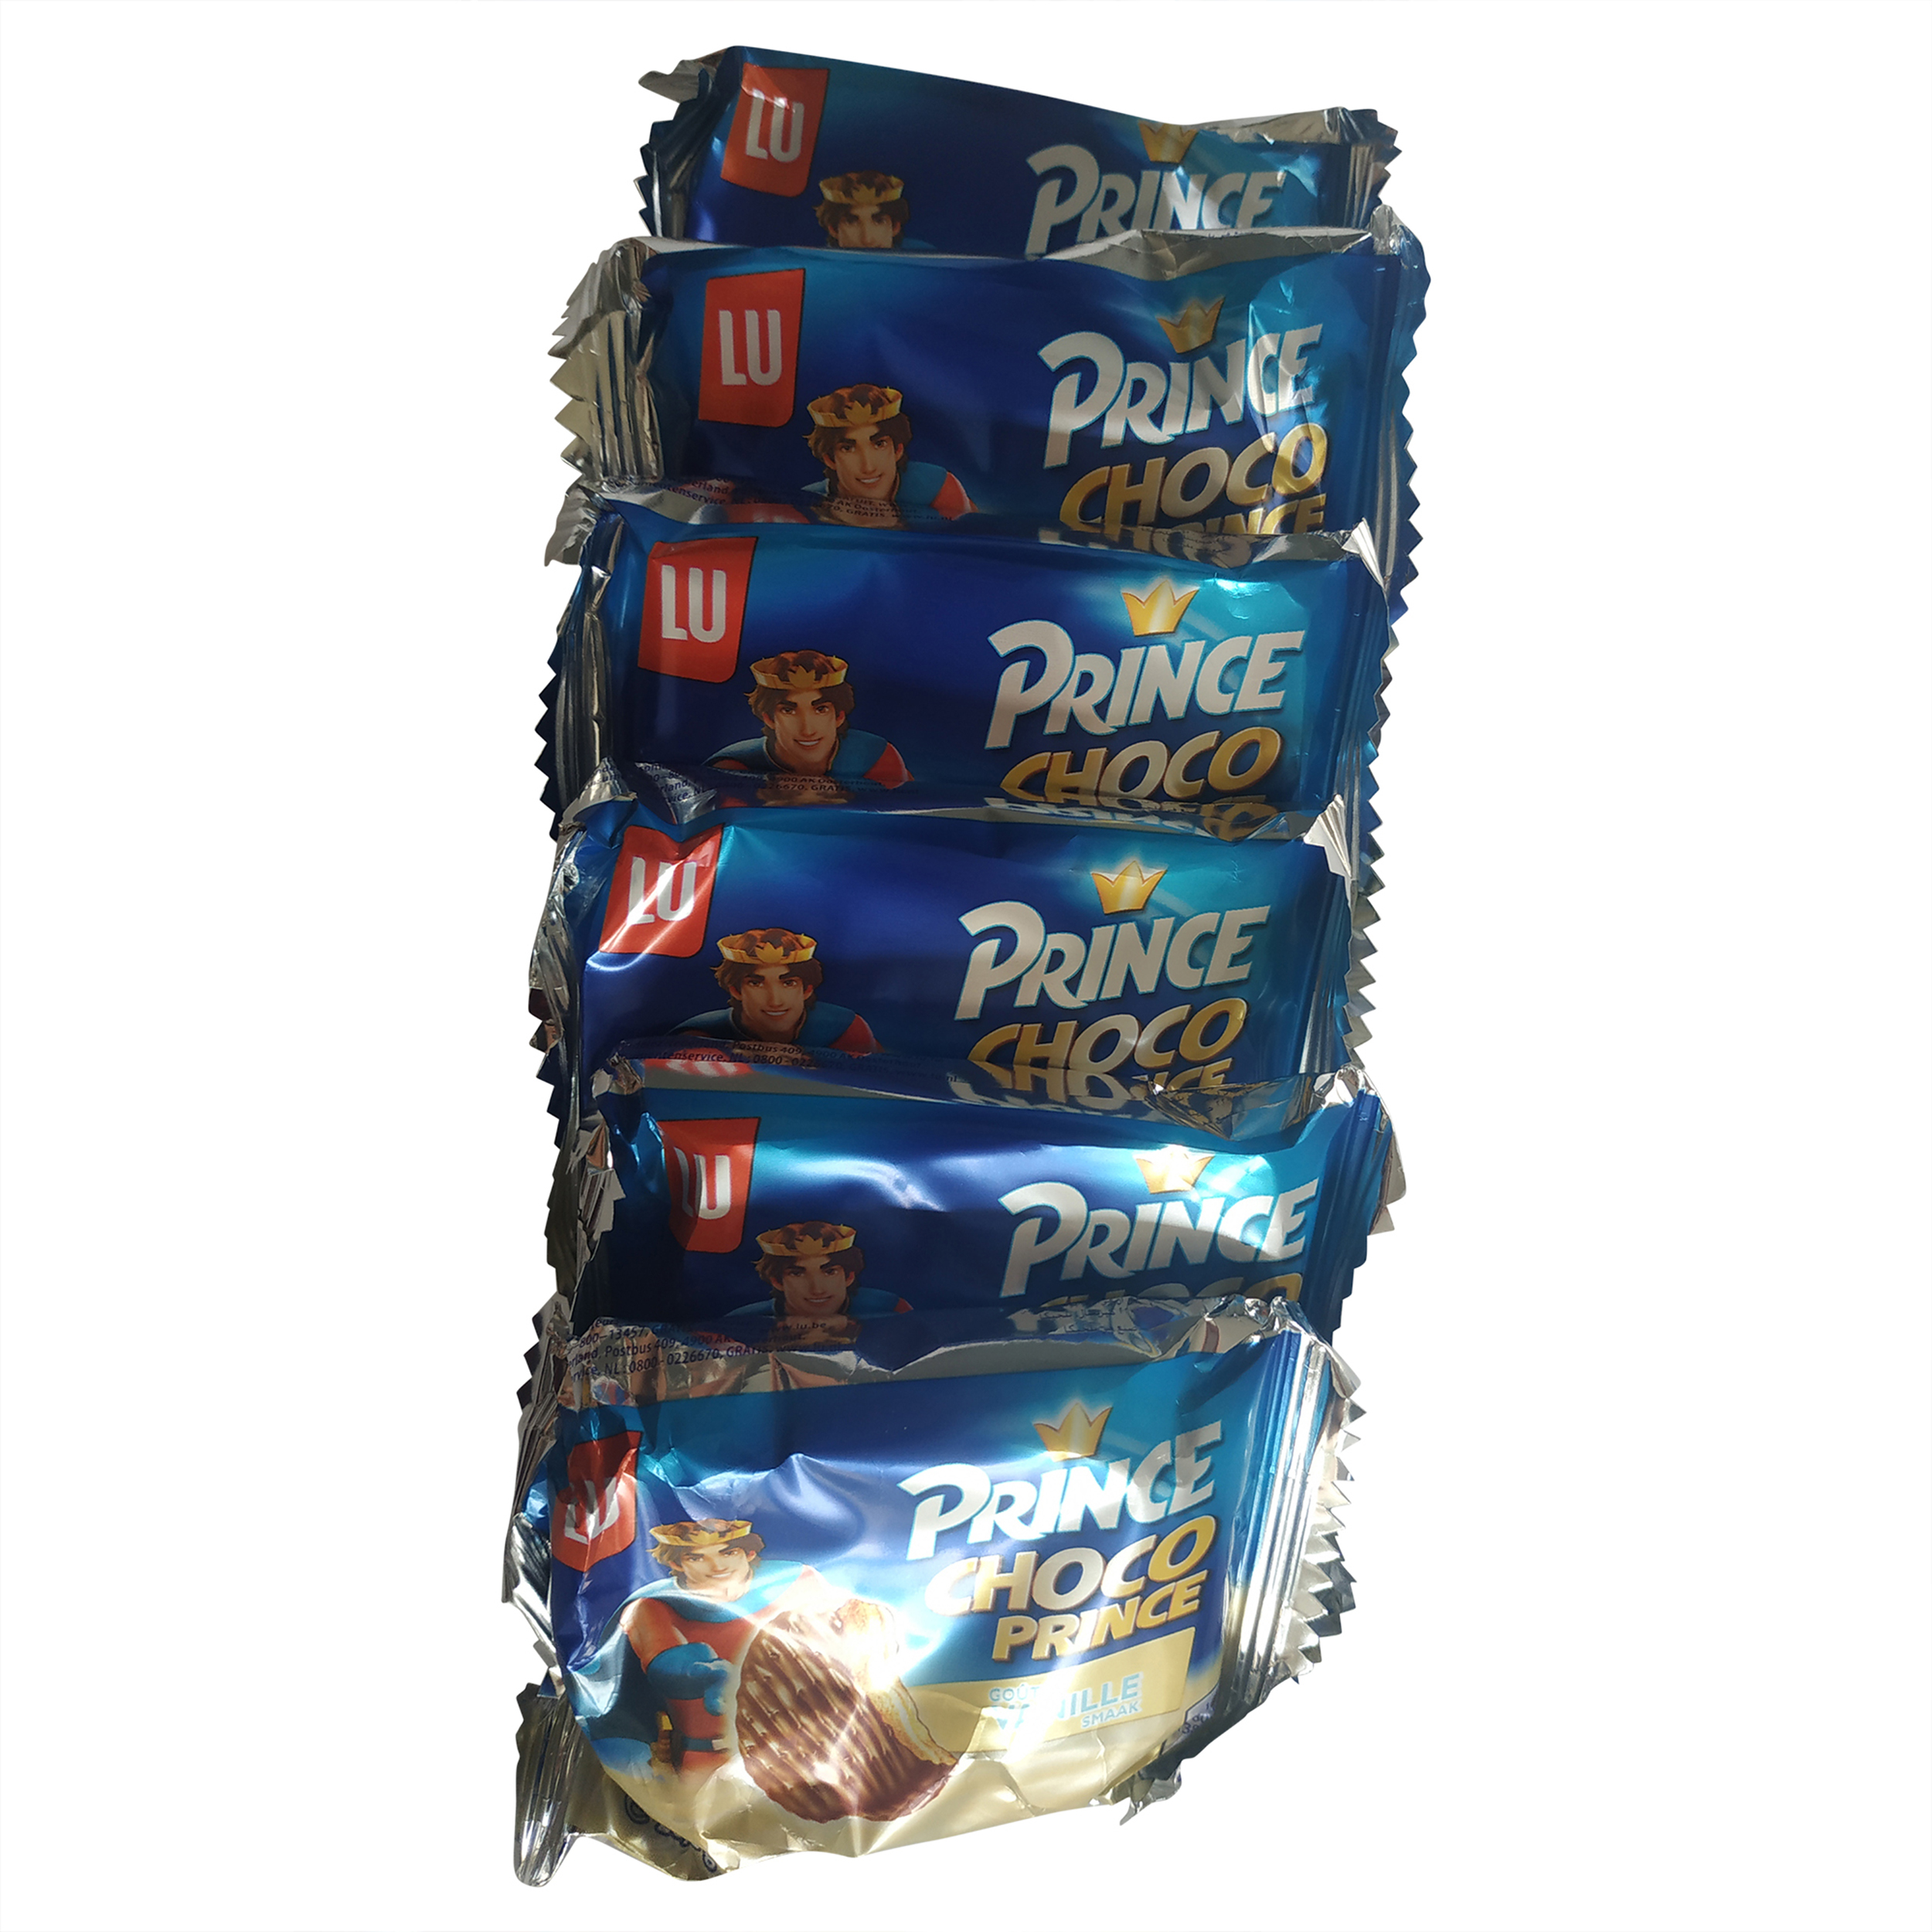 LU - Prince Chocolate Biscuits - 3 packs - 300g per pack - Chocolate chip  flavored cookies - With chocolate nuggets - Rich in cereals - Cocoa cream